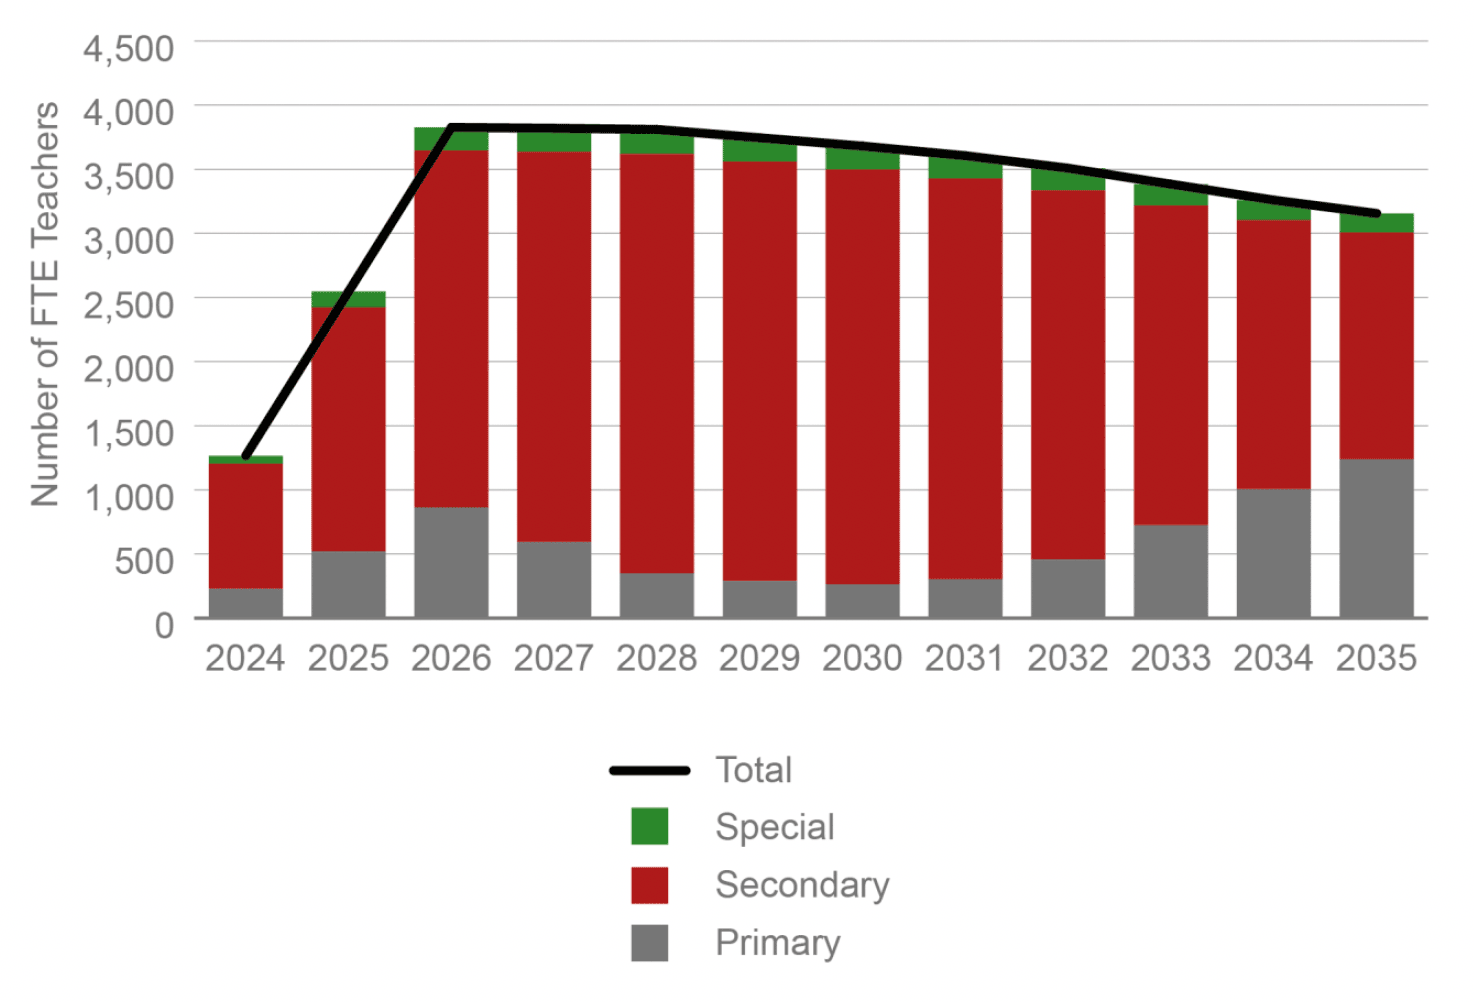 Combination chart with a line plot showing how maintaining the PTR whilst reducing class contact time would require teacher redeployment across every year to 2035. This redeployment must happen at an increasing rate initially.